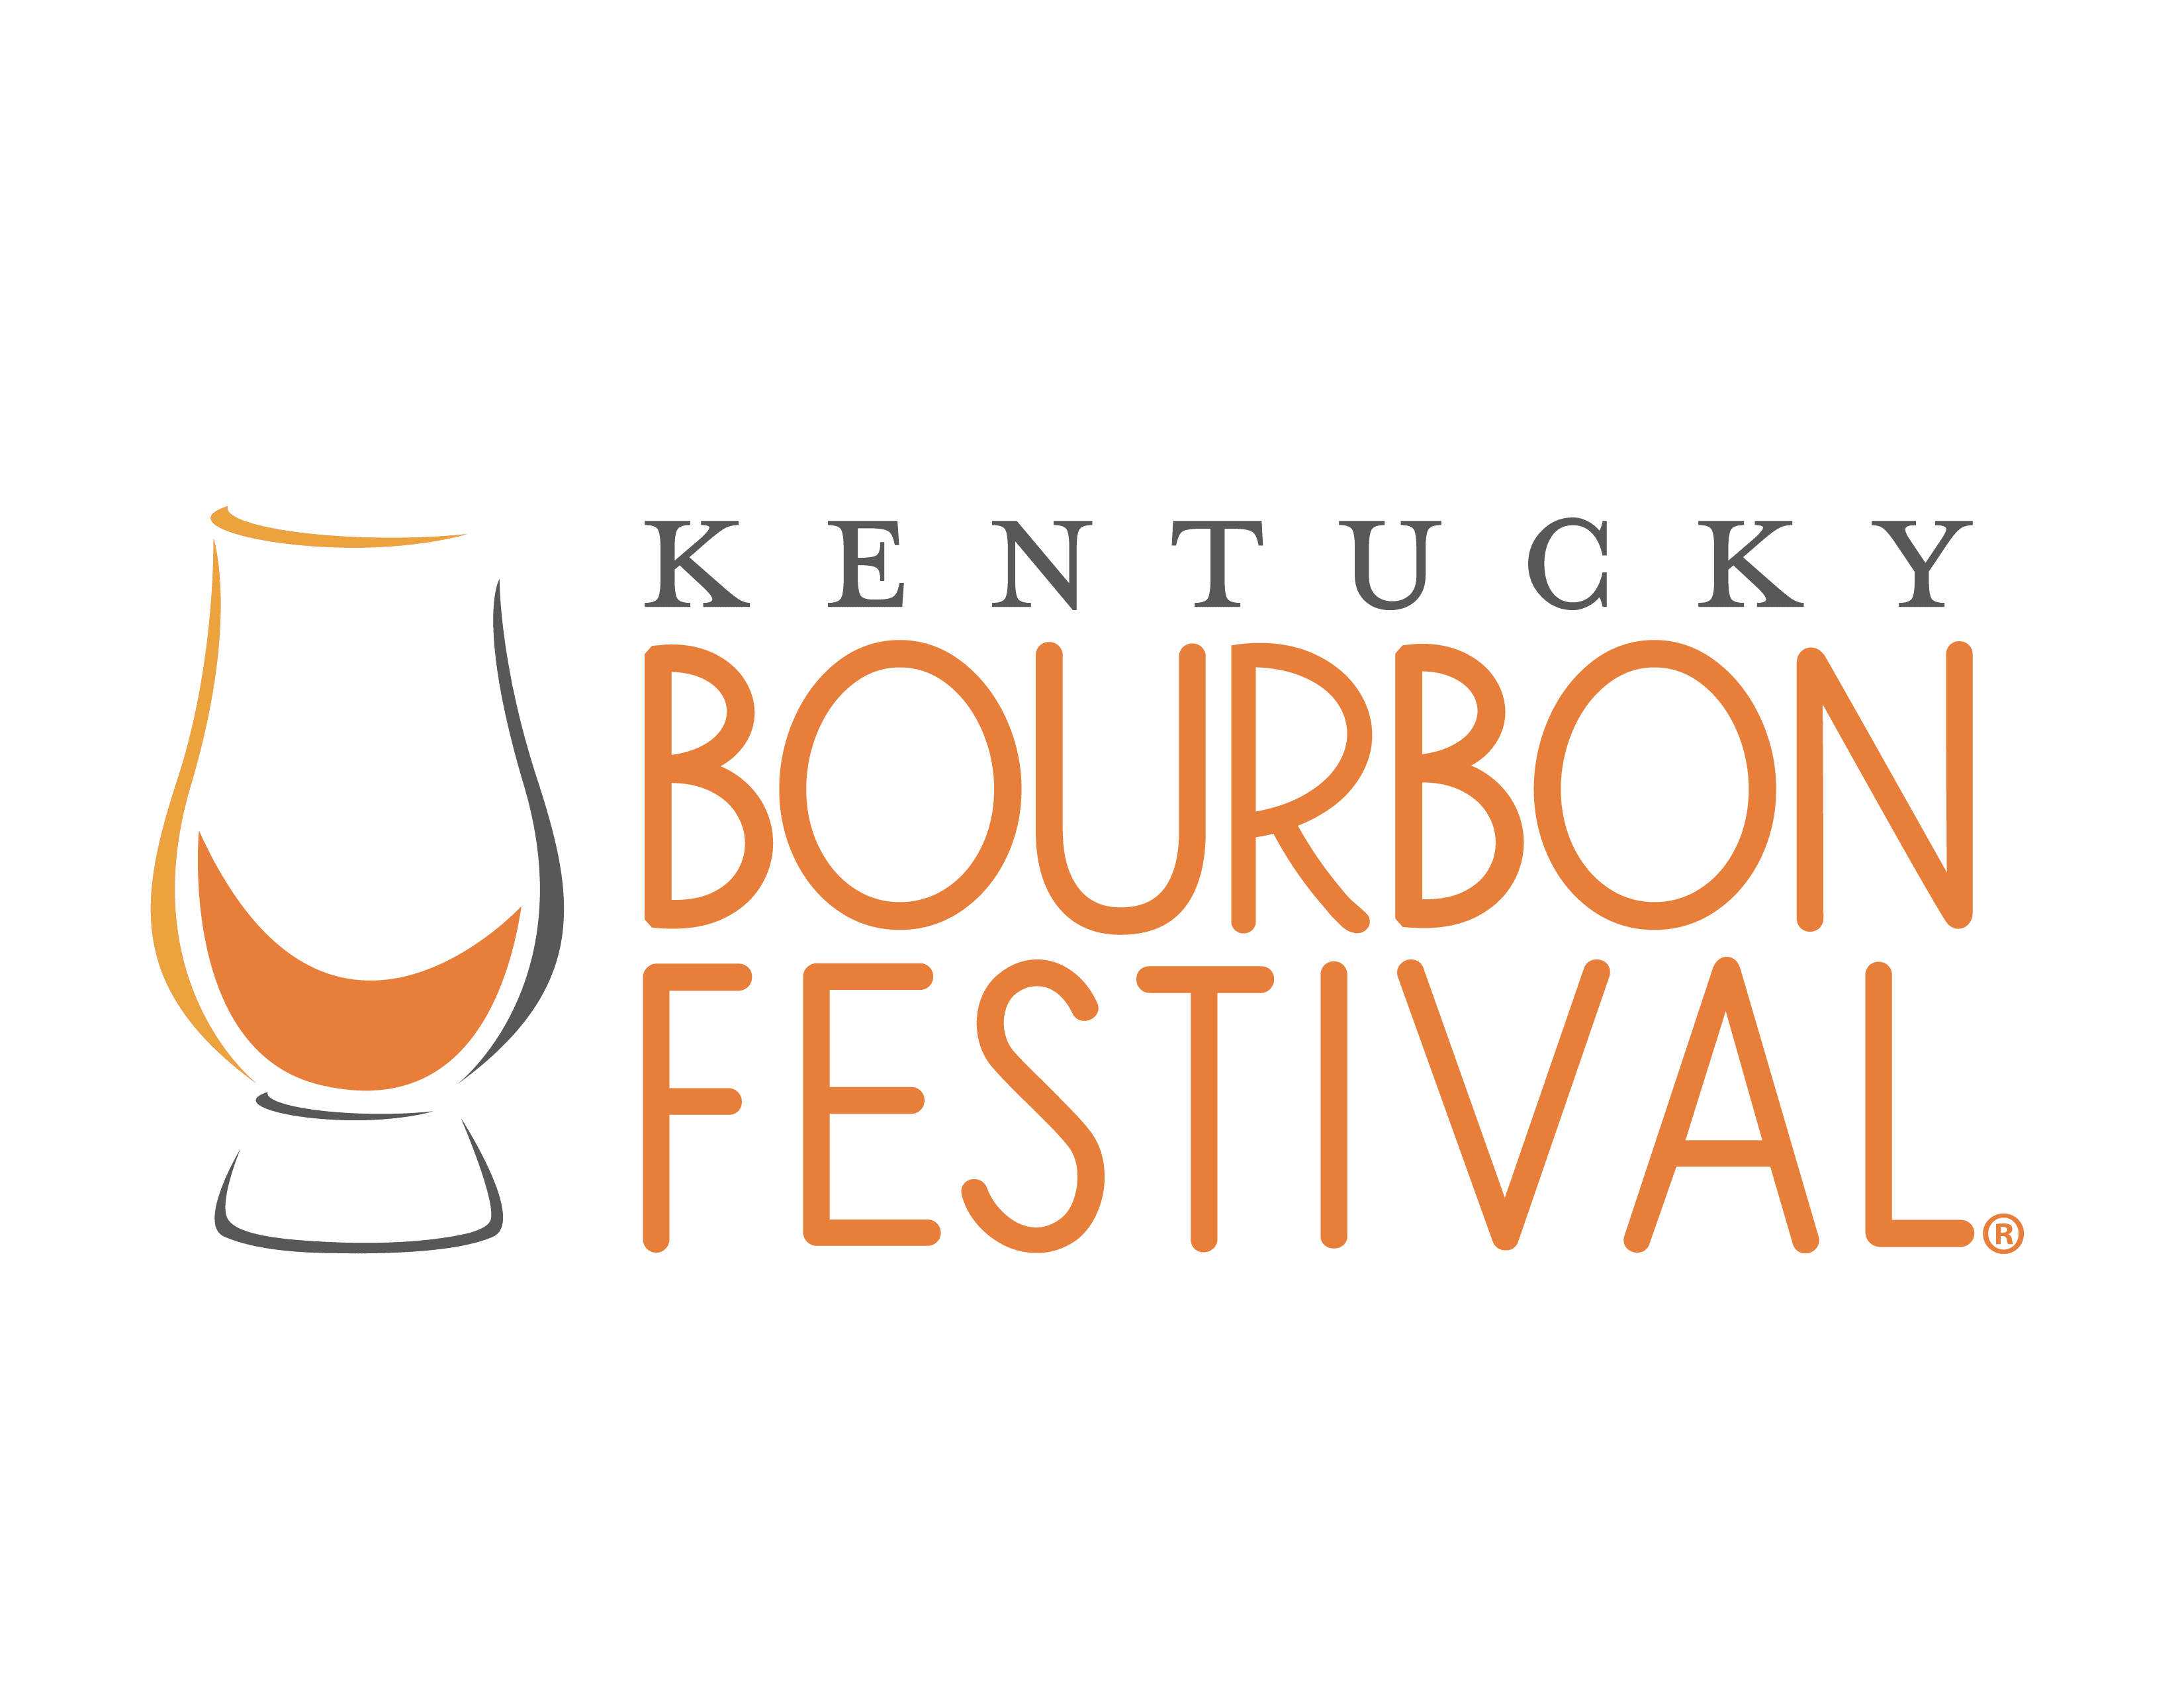 VIP Packages On Sale Now For New, Virtual Kentucky Bourbon Festival